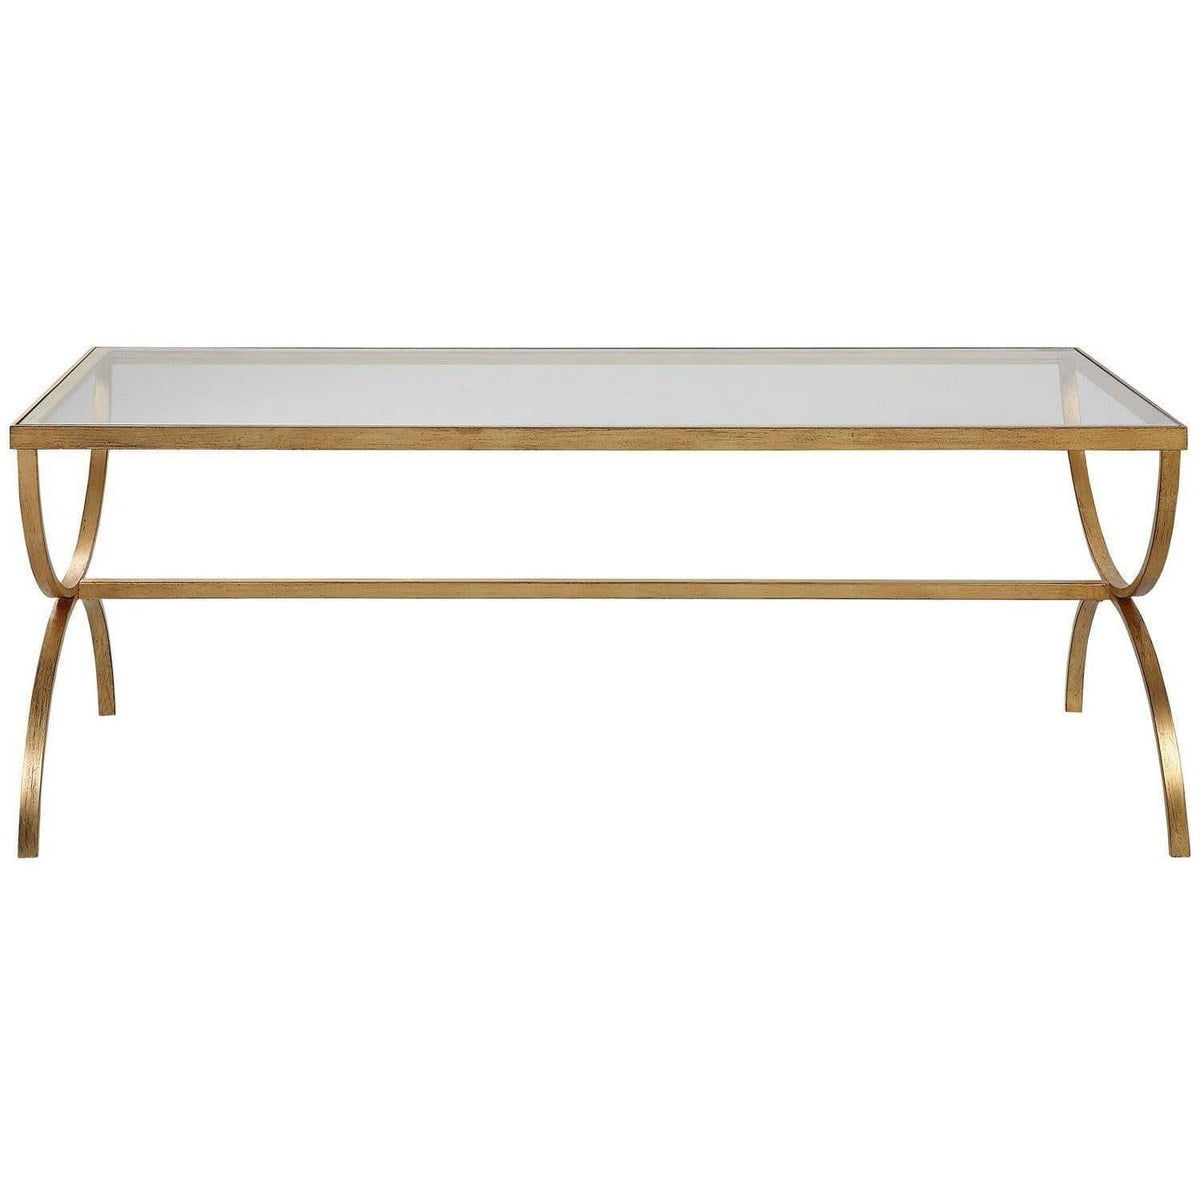 The Uttermost - Crescent Coffee Table - 25186 | Montreal Lighting & Hardware